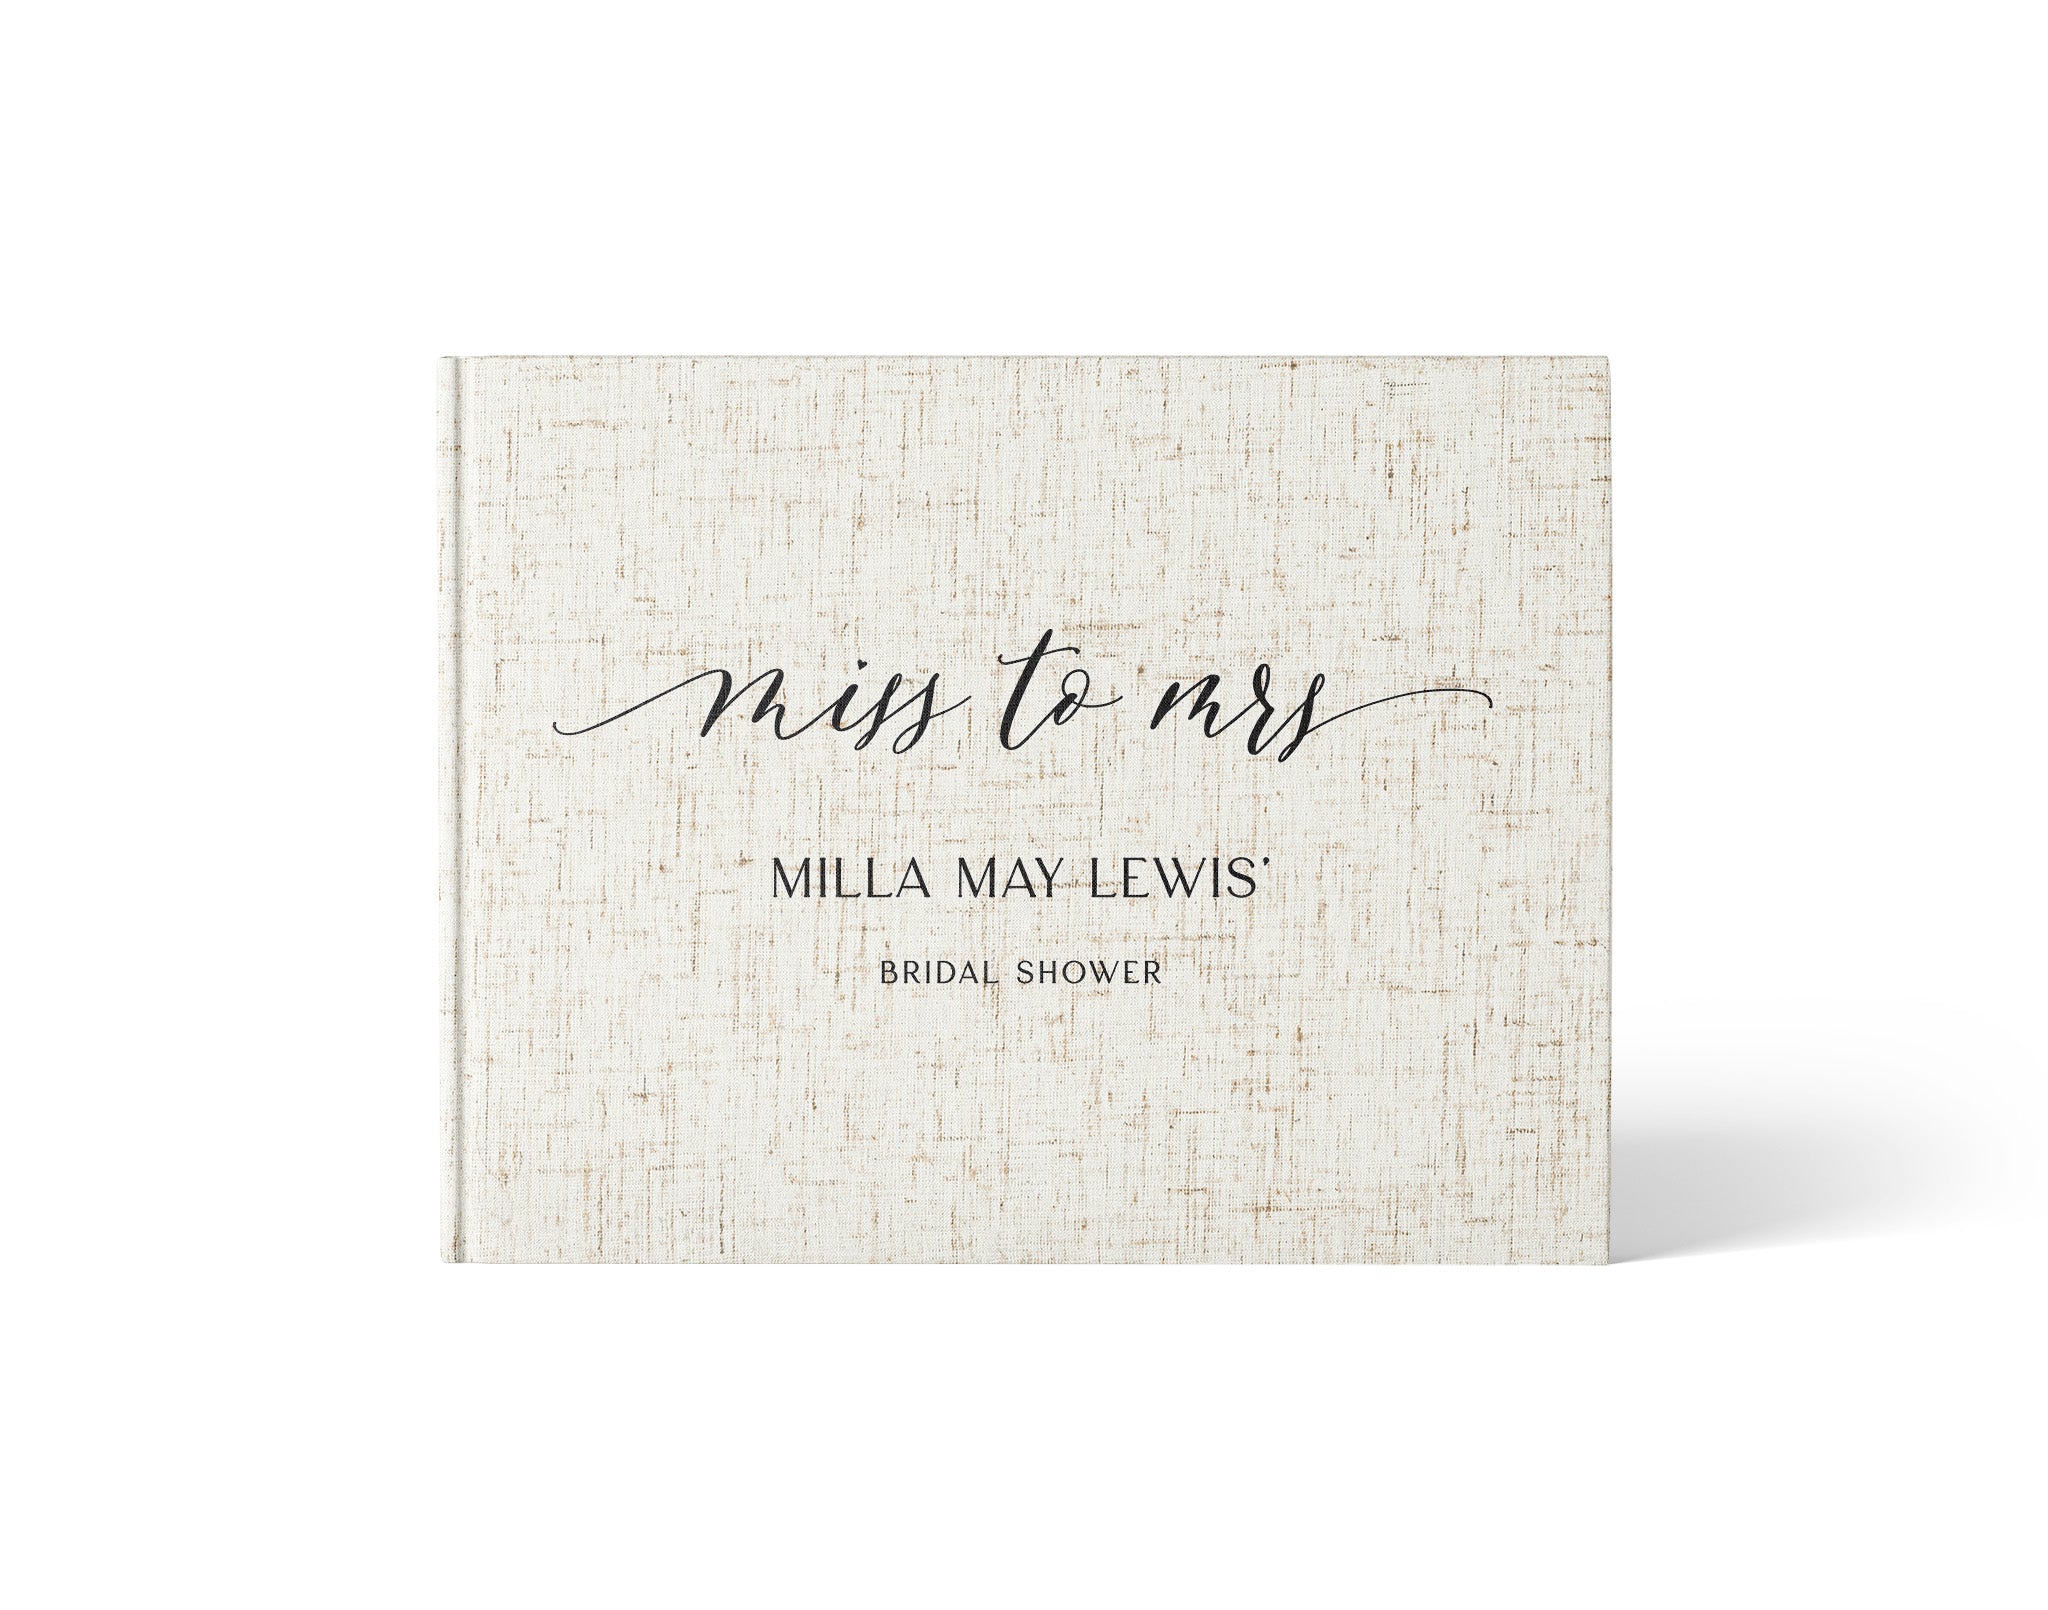 Miss to Mrs | Bridal Shower Guest Book